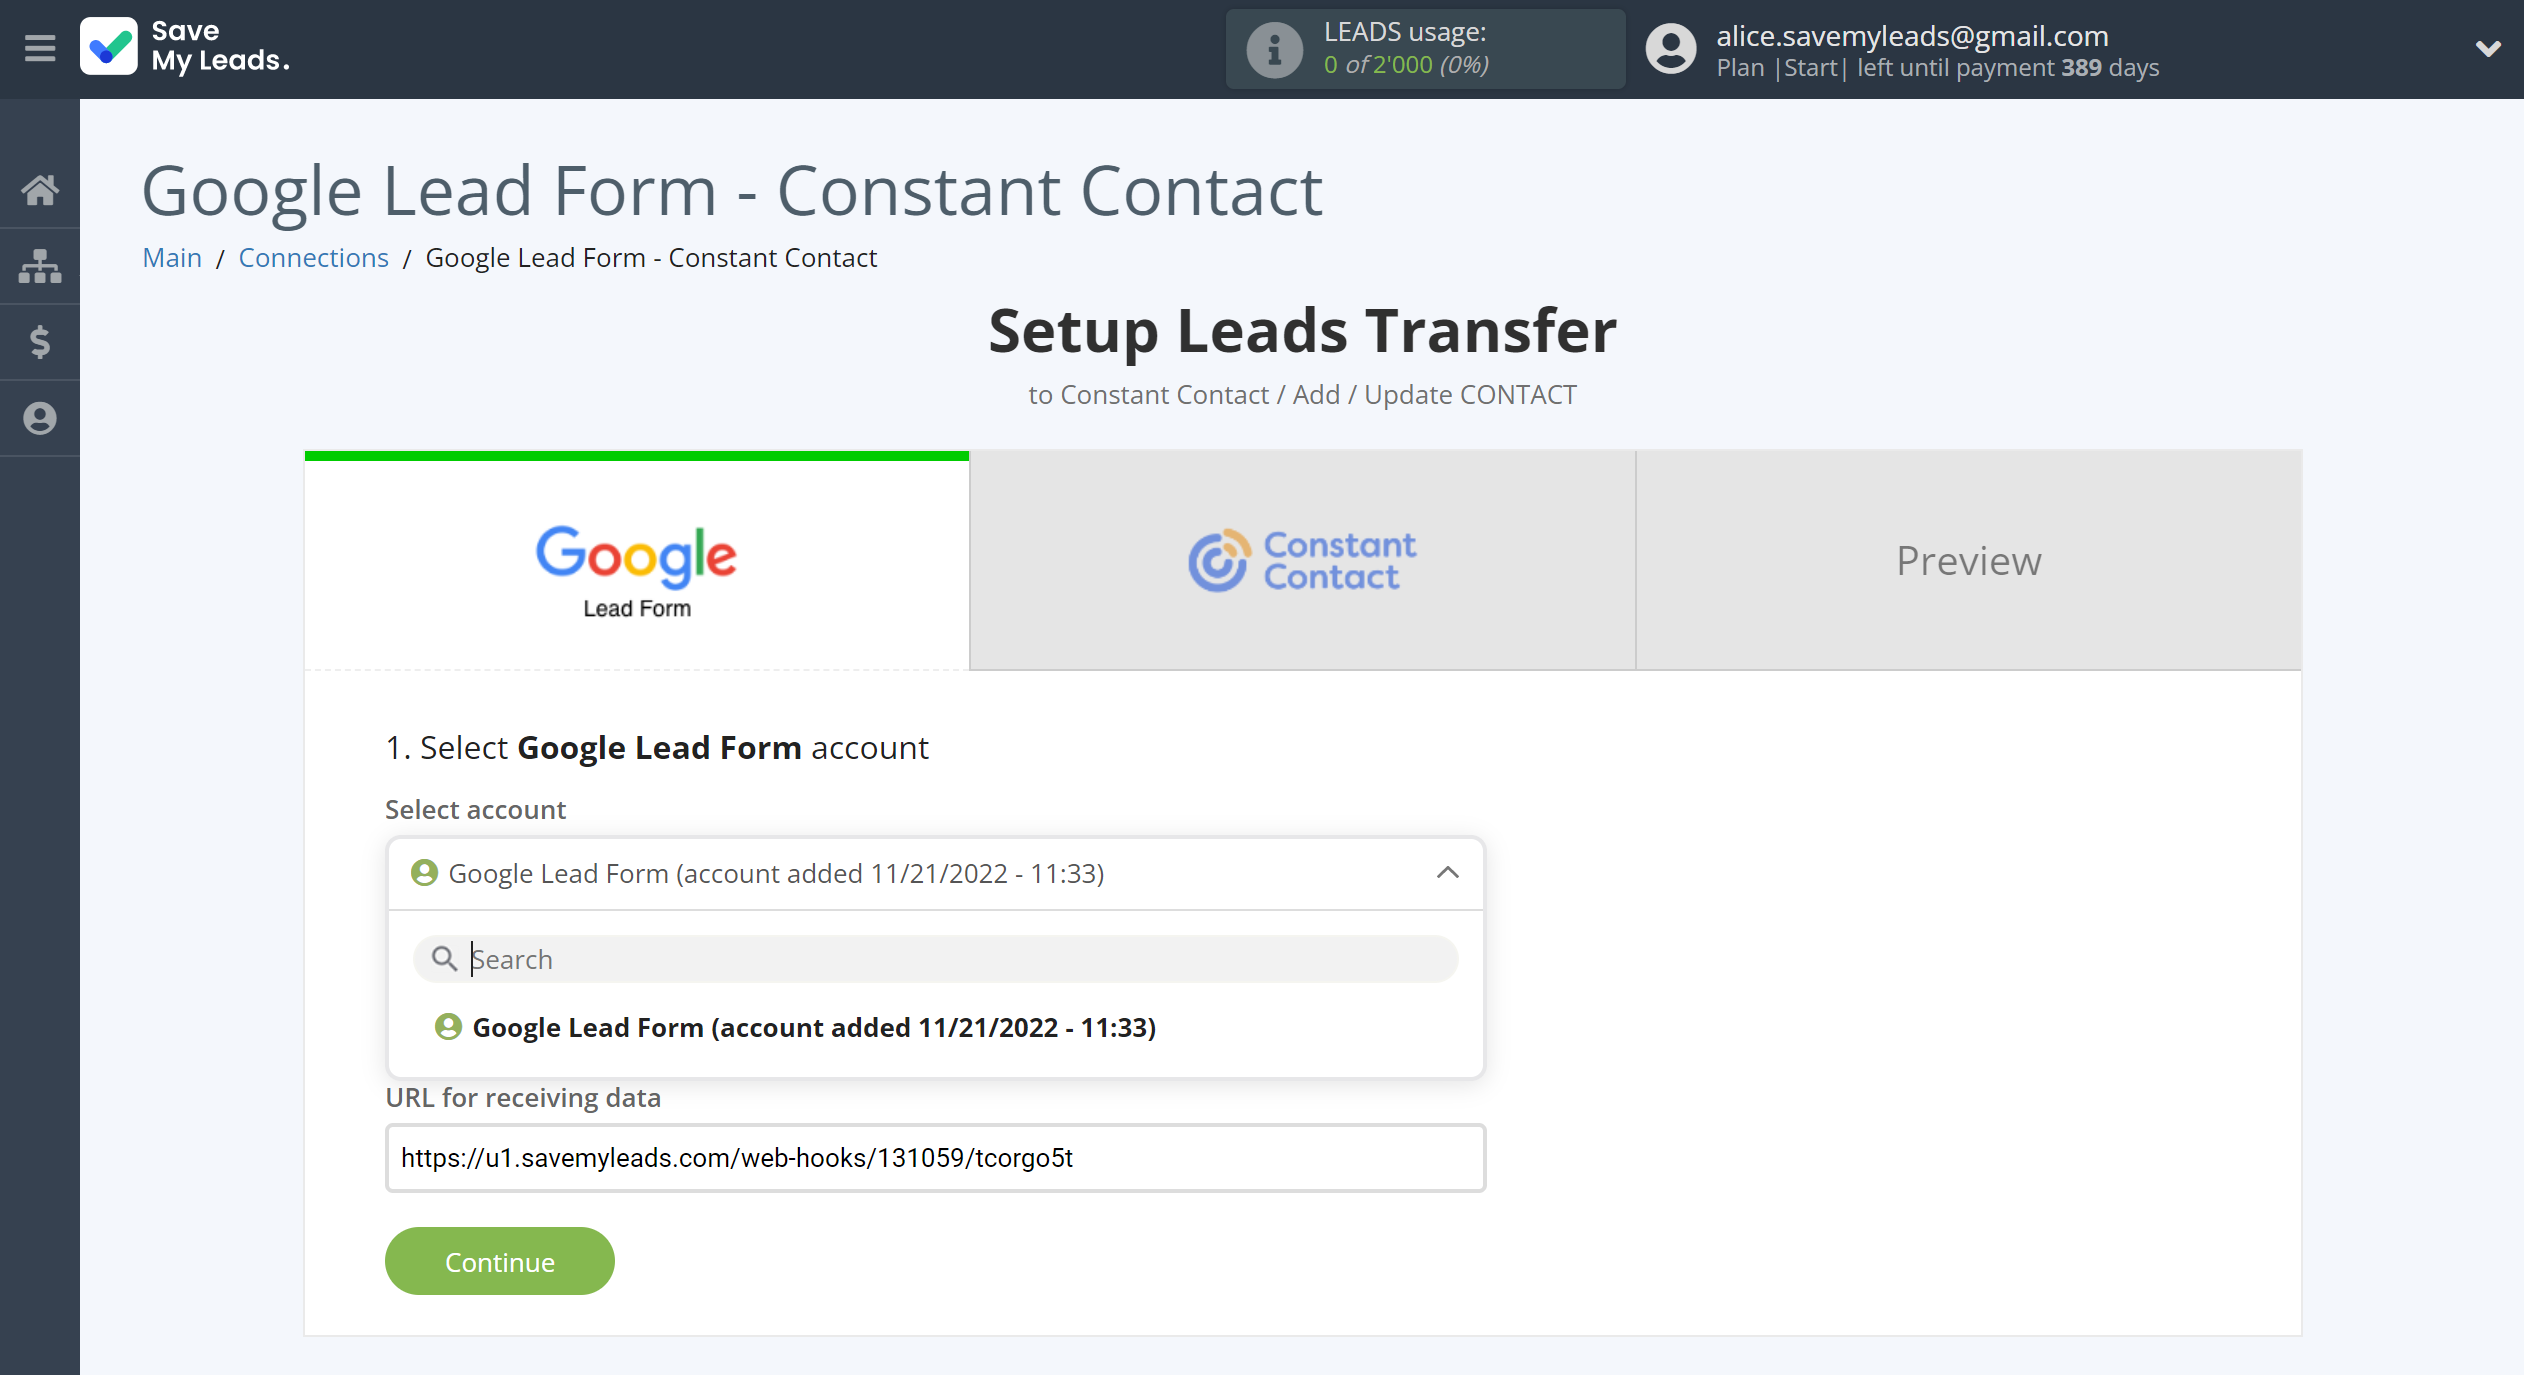 How to Connect Google Lead Form with Constant Contact | Data Source account selection